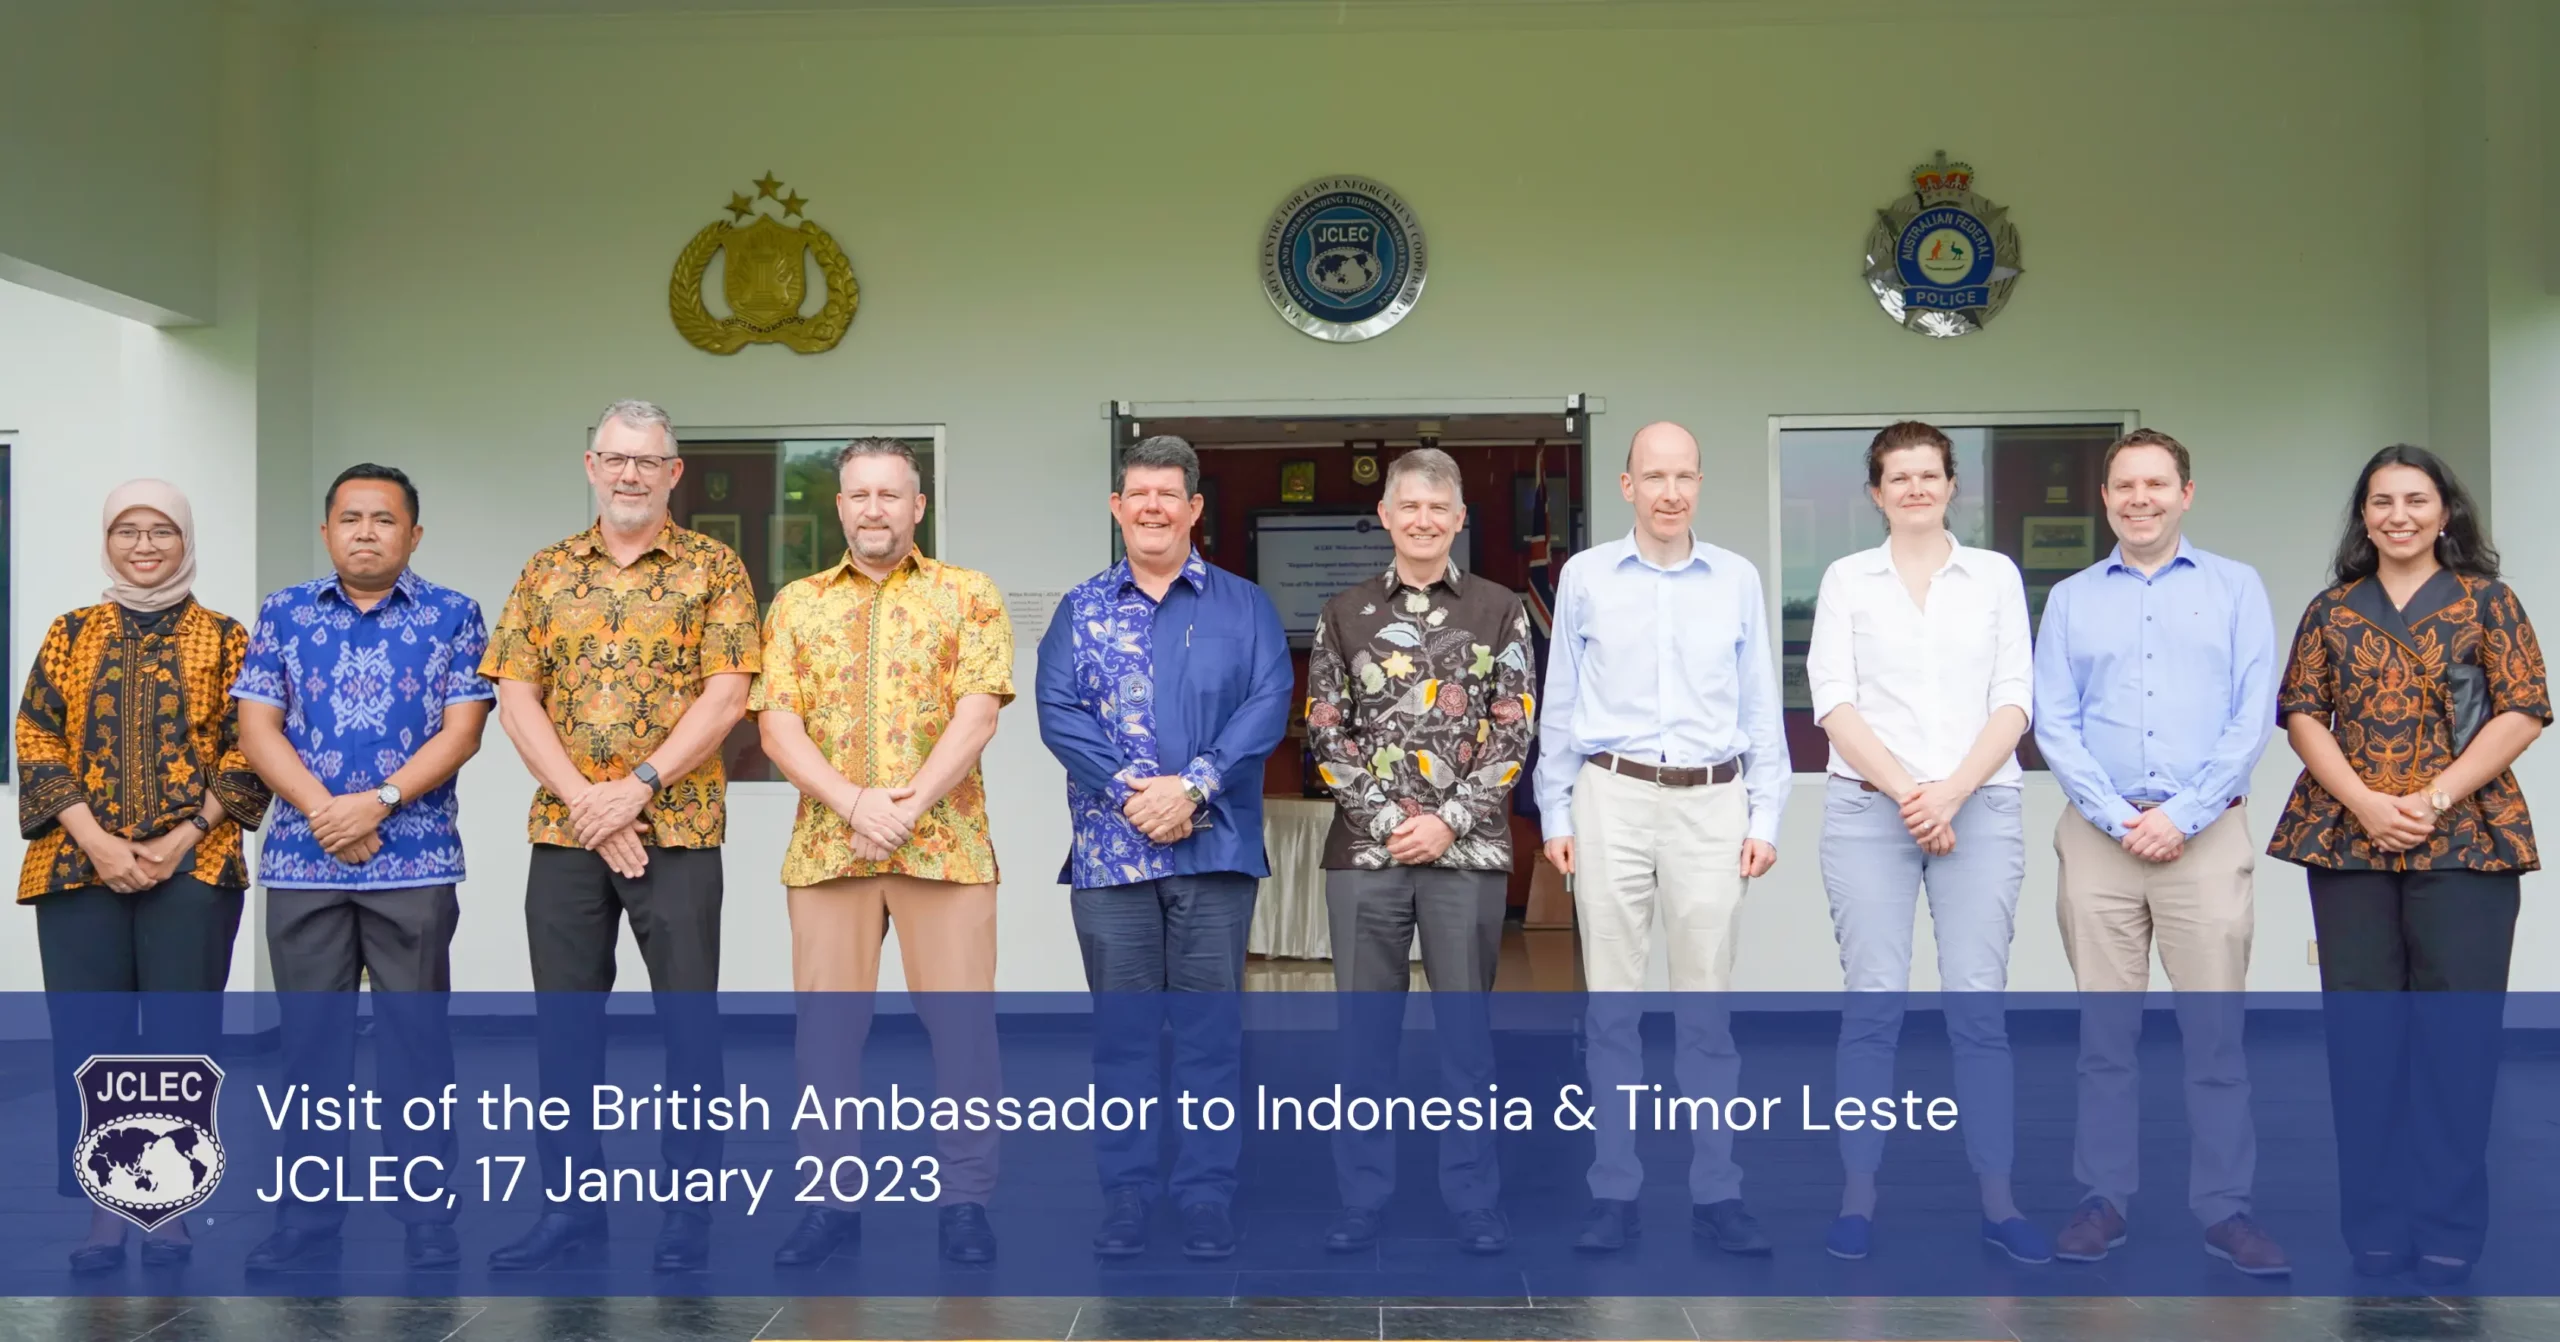 The official photograph of the visit of the British Ambassador to Indonesia & Timor Leste